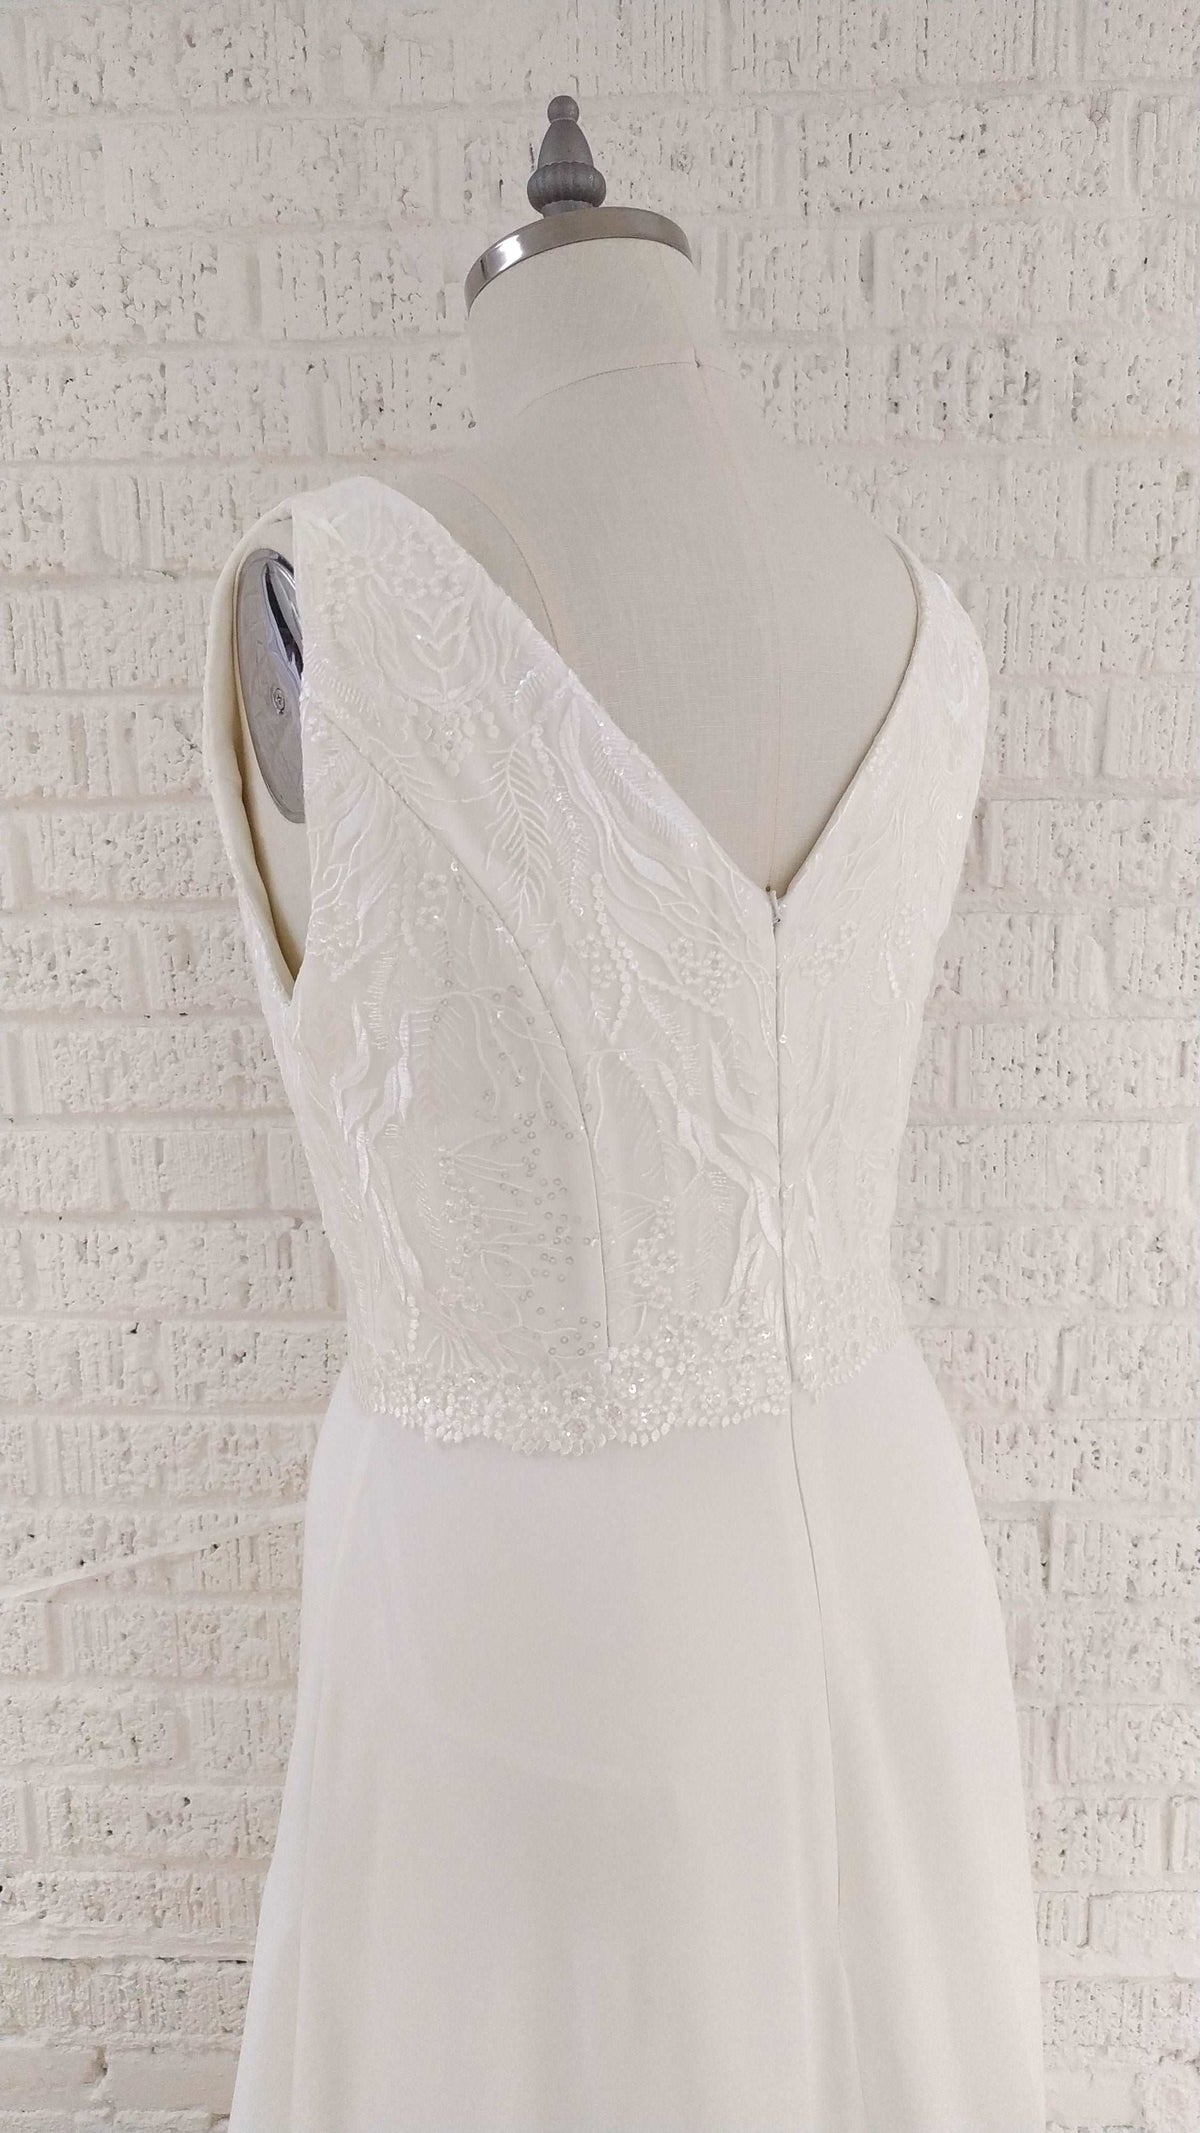 Canadian wedding dress. Off the rack wedding dress. Size US 14. Crepe fit and flare simple wedding gown. Handmade in our Toronto bridal boutique..